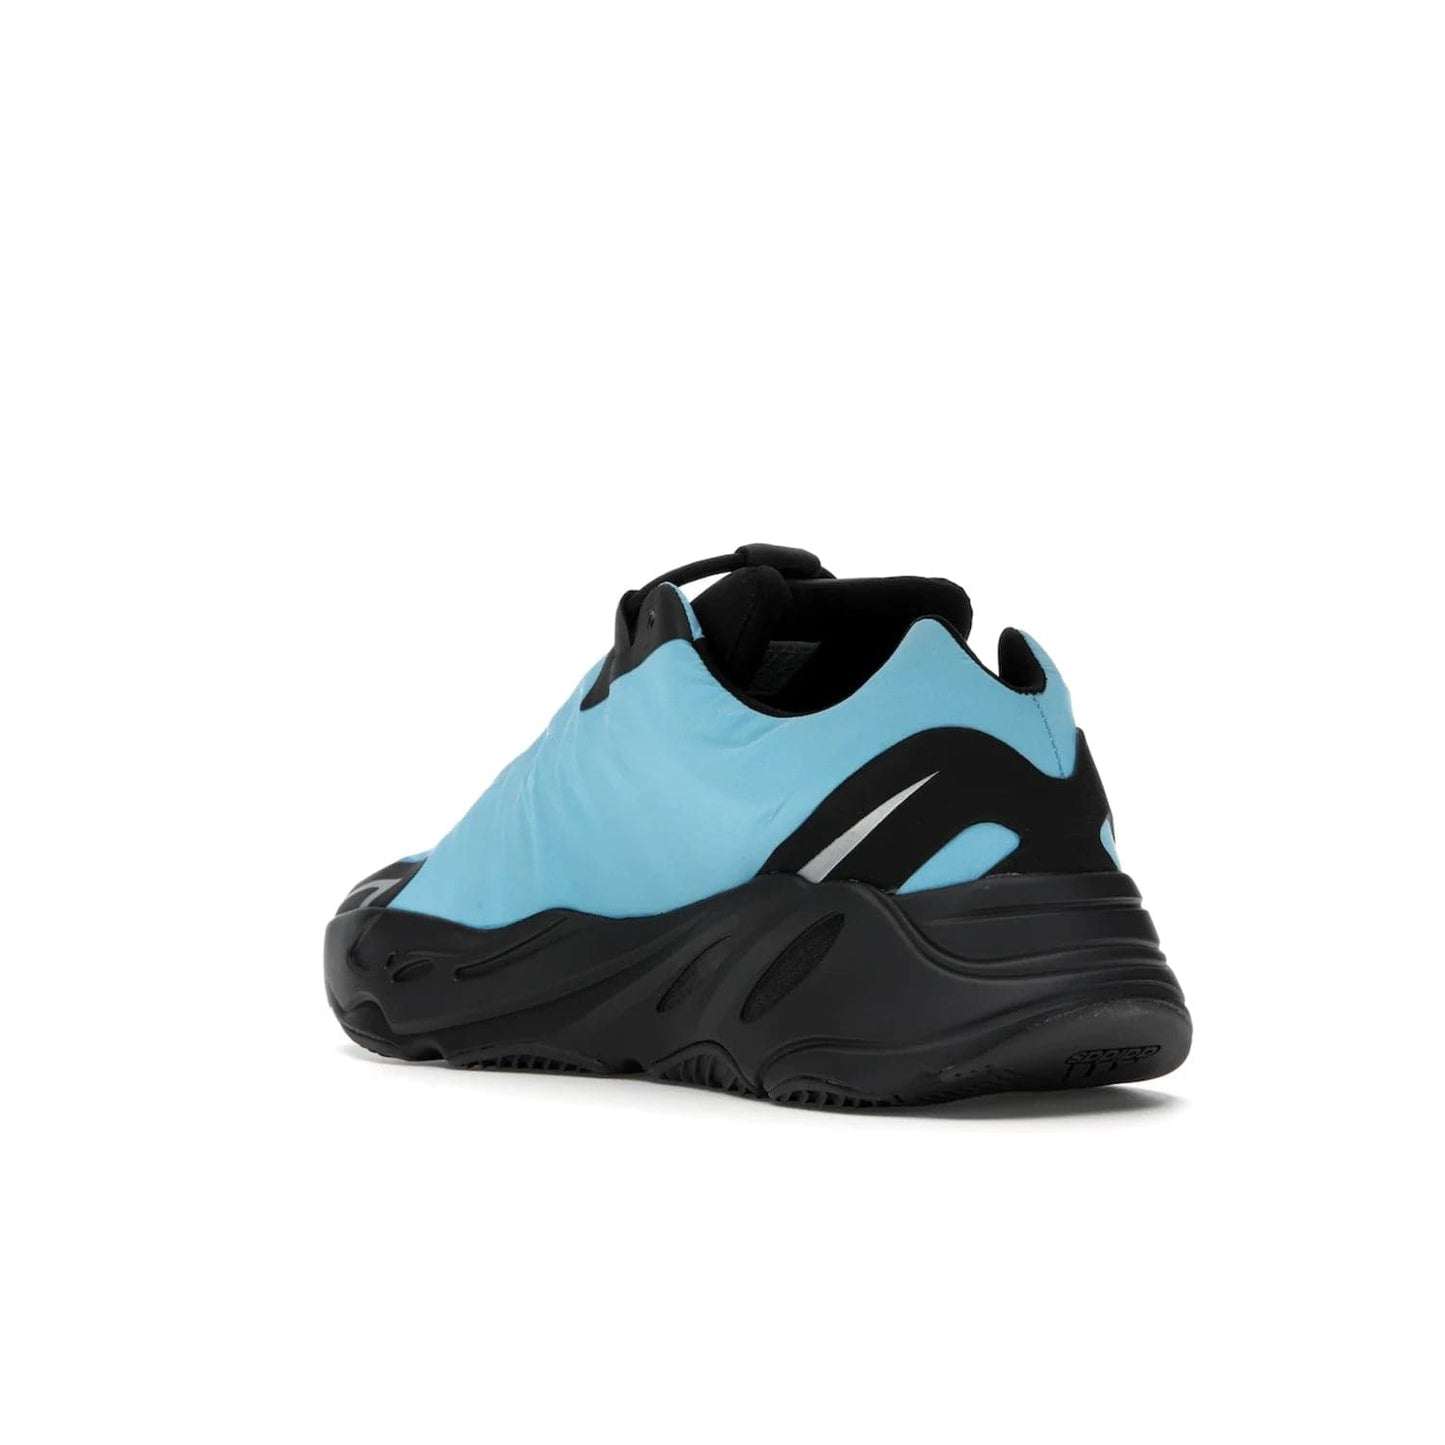 adidas Yeezy Boost 700 MNVN Bright Cyan - Image 24 - Only at www.BallersClubKickz.com - The adidas Yeezy Boost 700 MNVN features a Bright Cyan nylon upper with iconic "700" graphics and a sculptural black Boost sole for superior style and comfort. Step into legendary style and comfort in June 2021.